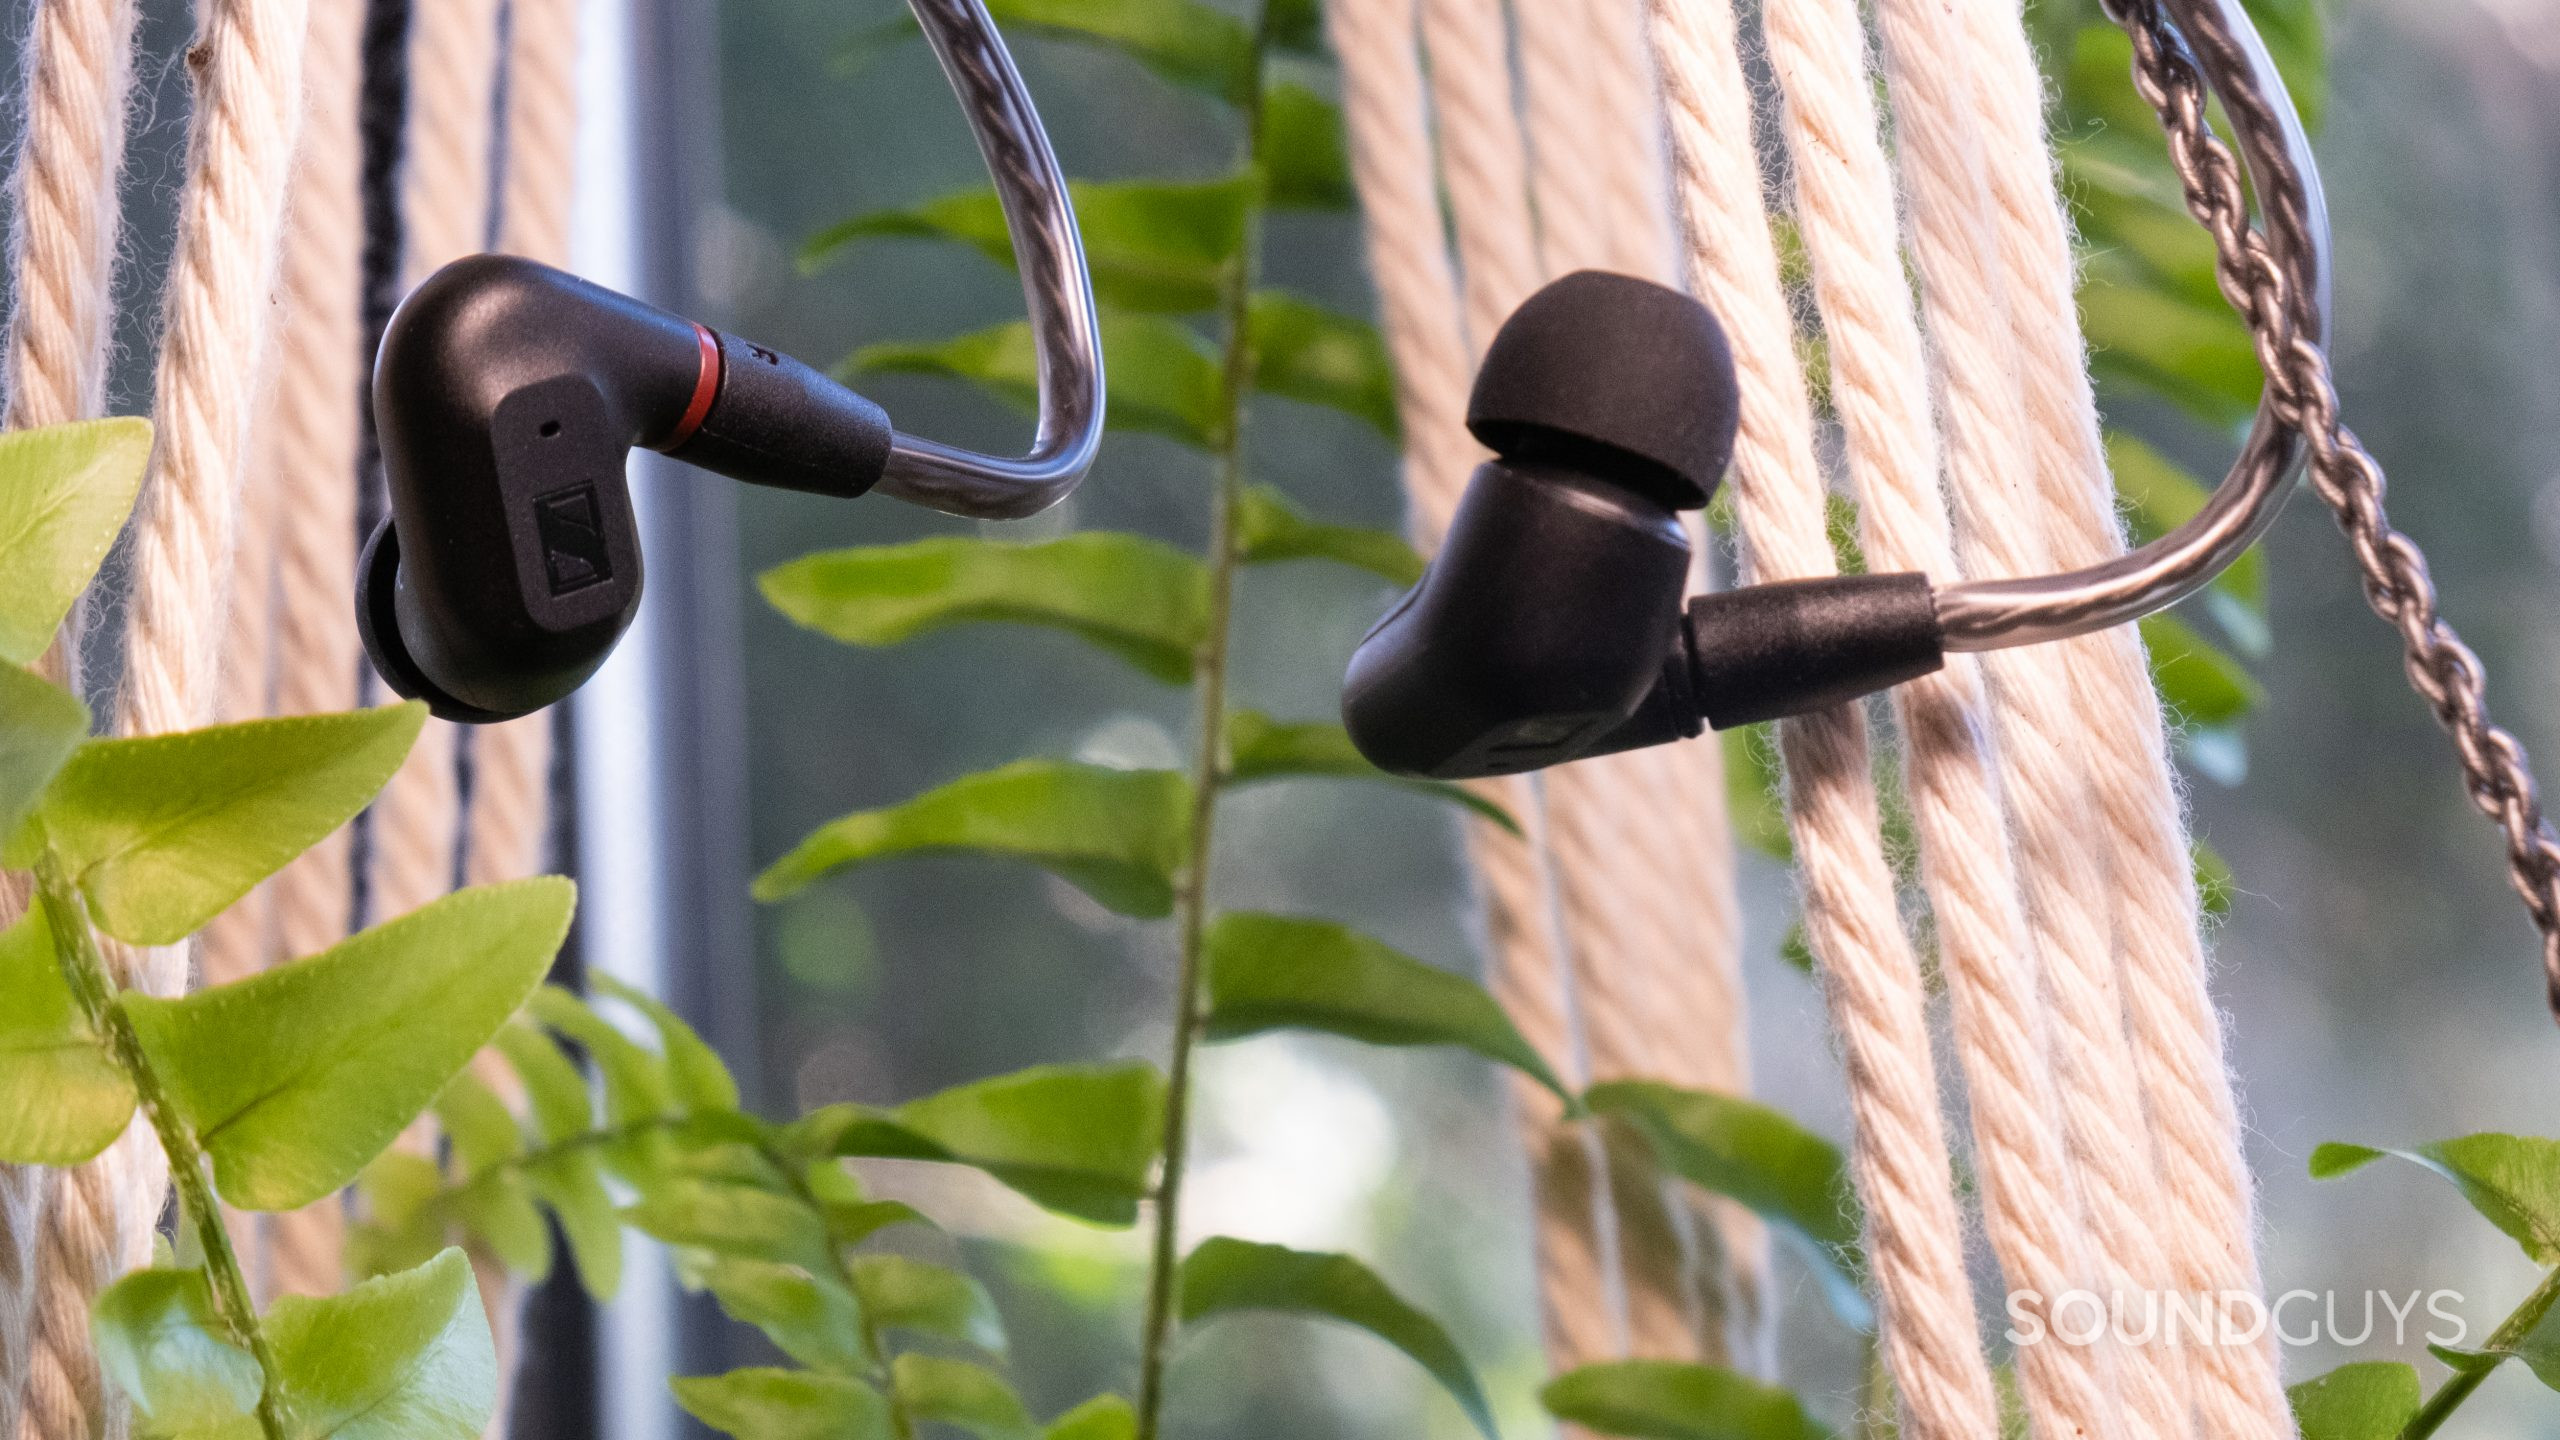 A close up of the Sennheiser IE 200 hangs from some twine with a plant.